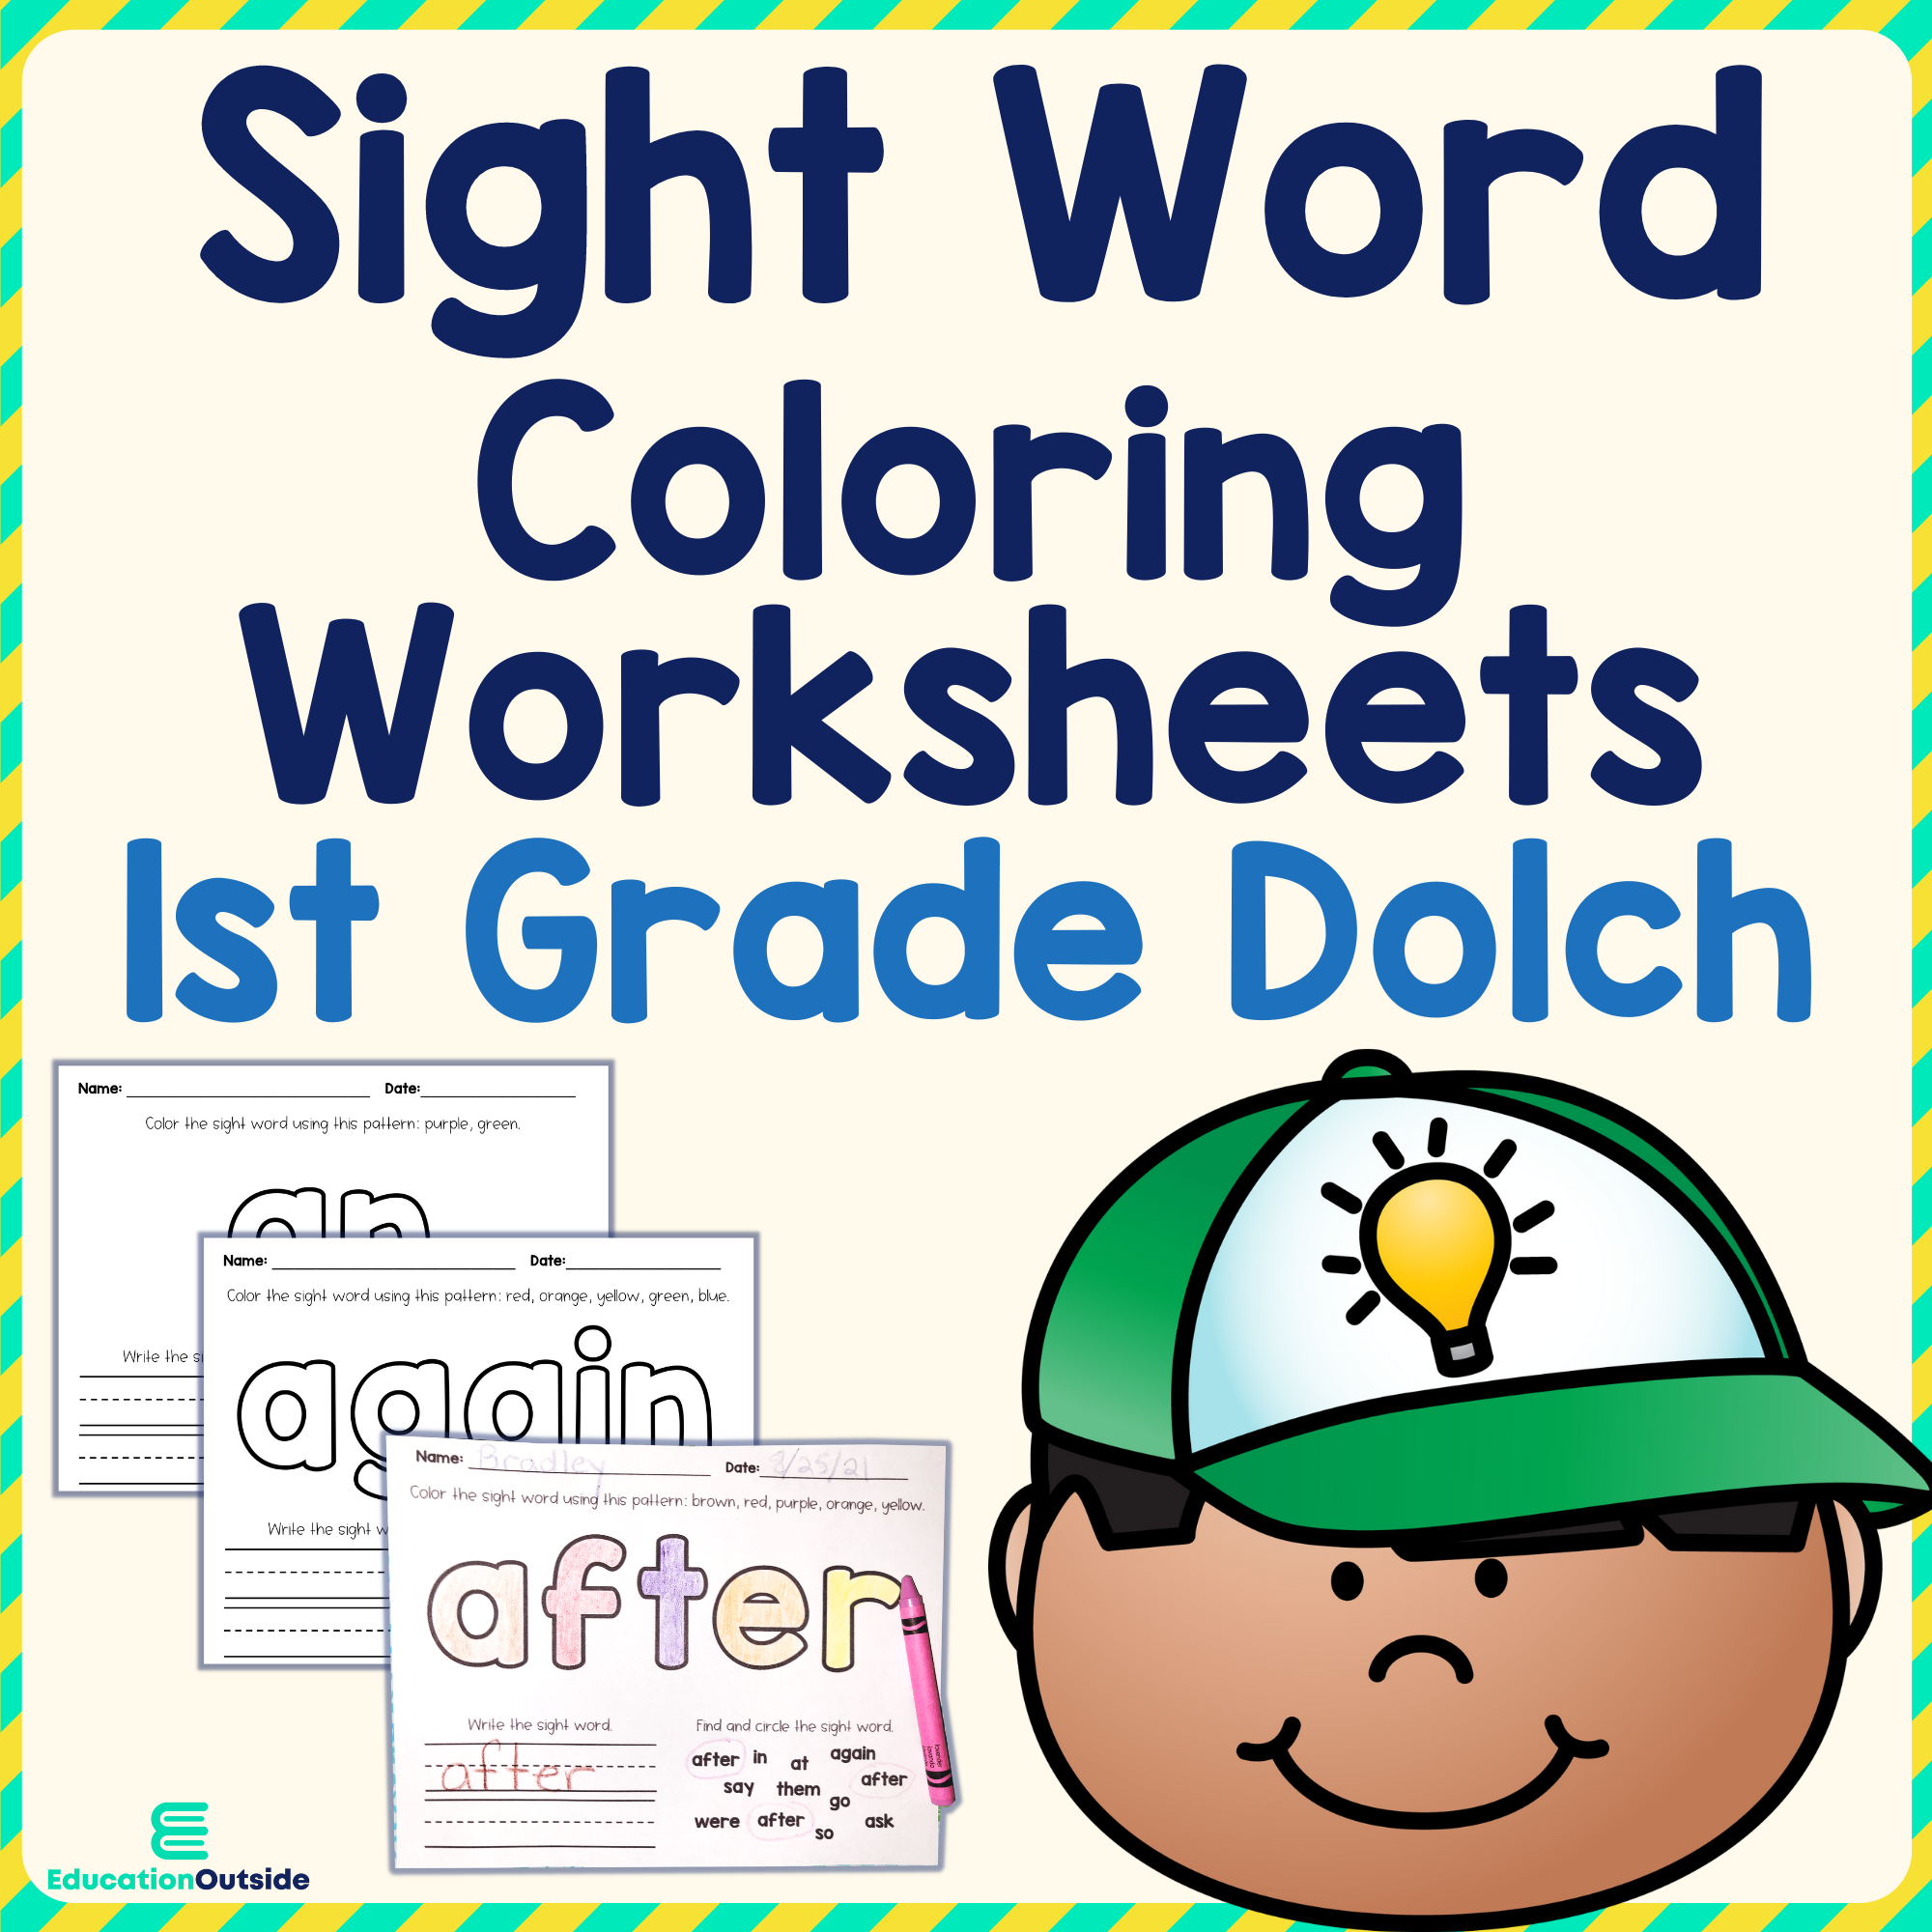 Sight word coloring worksheets st grade dolch